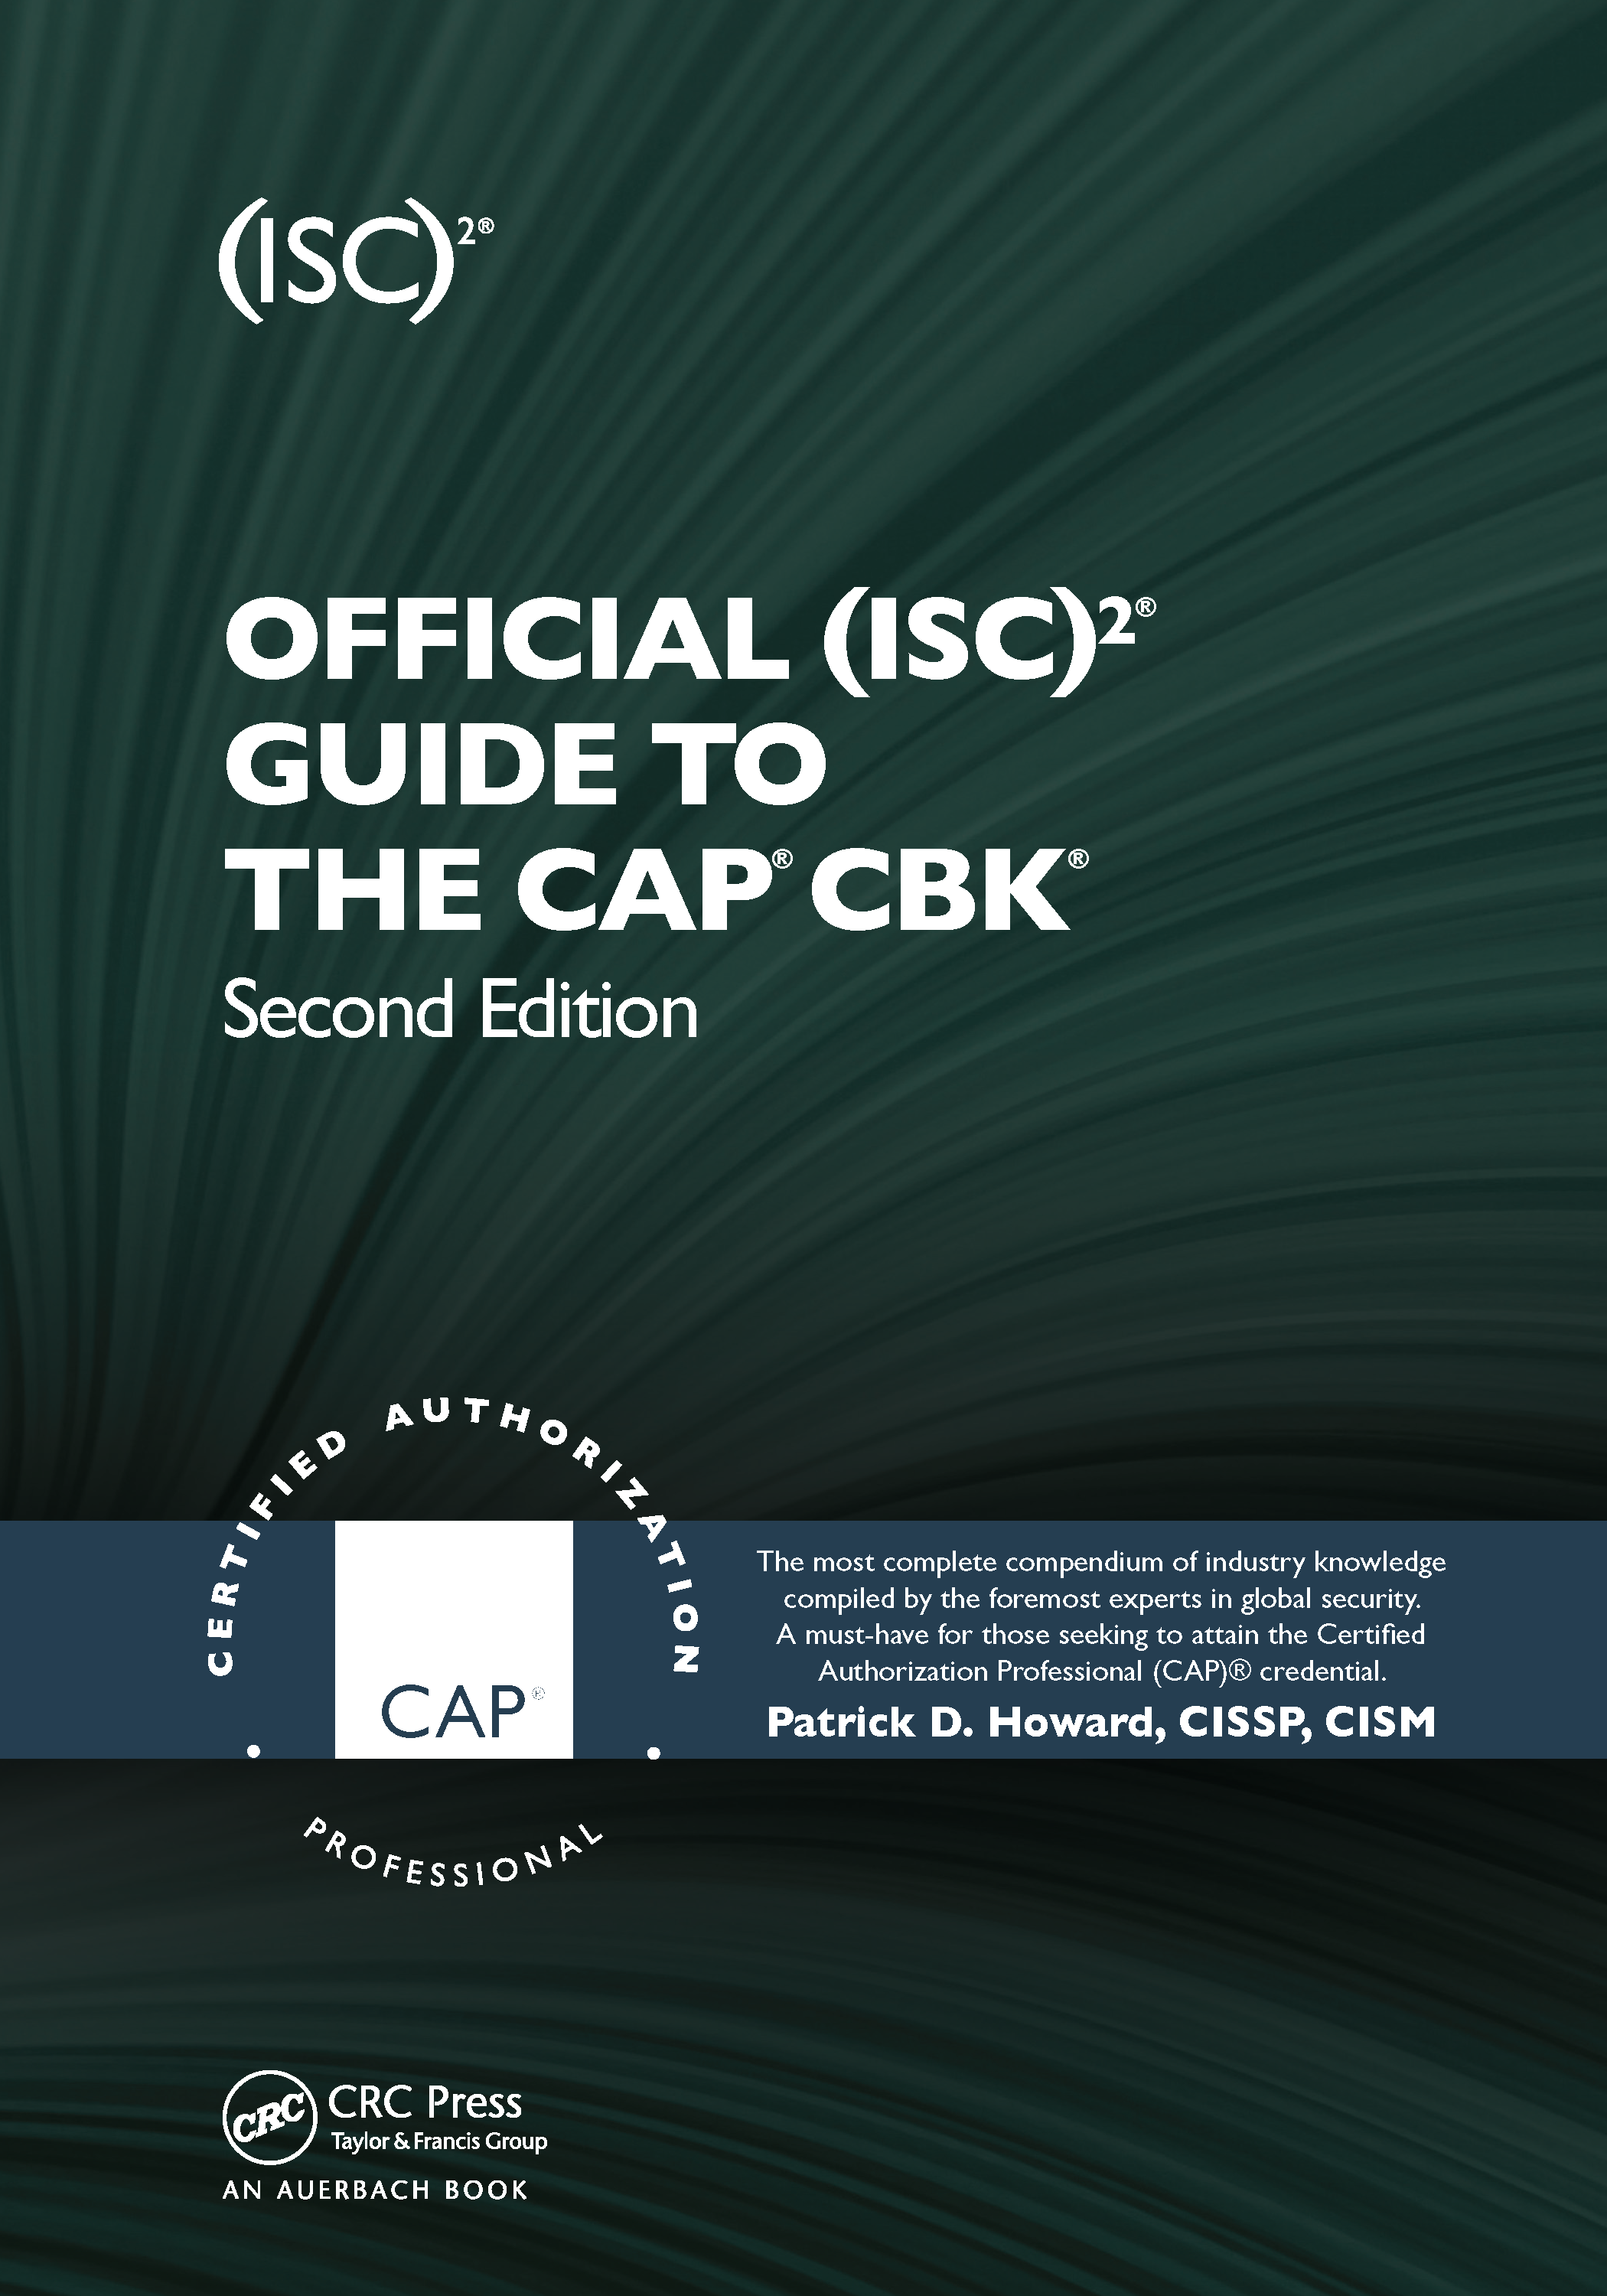 Cover for Official (ISC)2® Guide to the CAP® CBK®, Second Edition